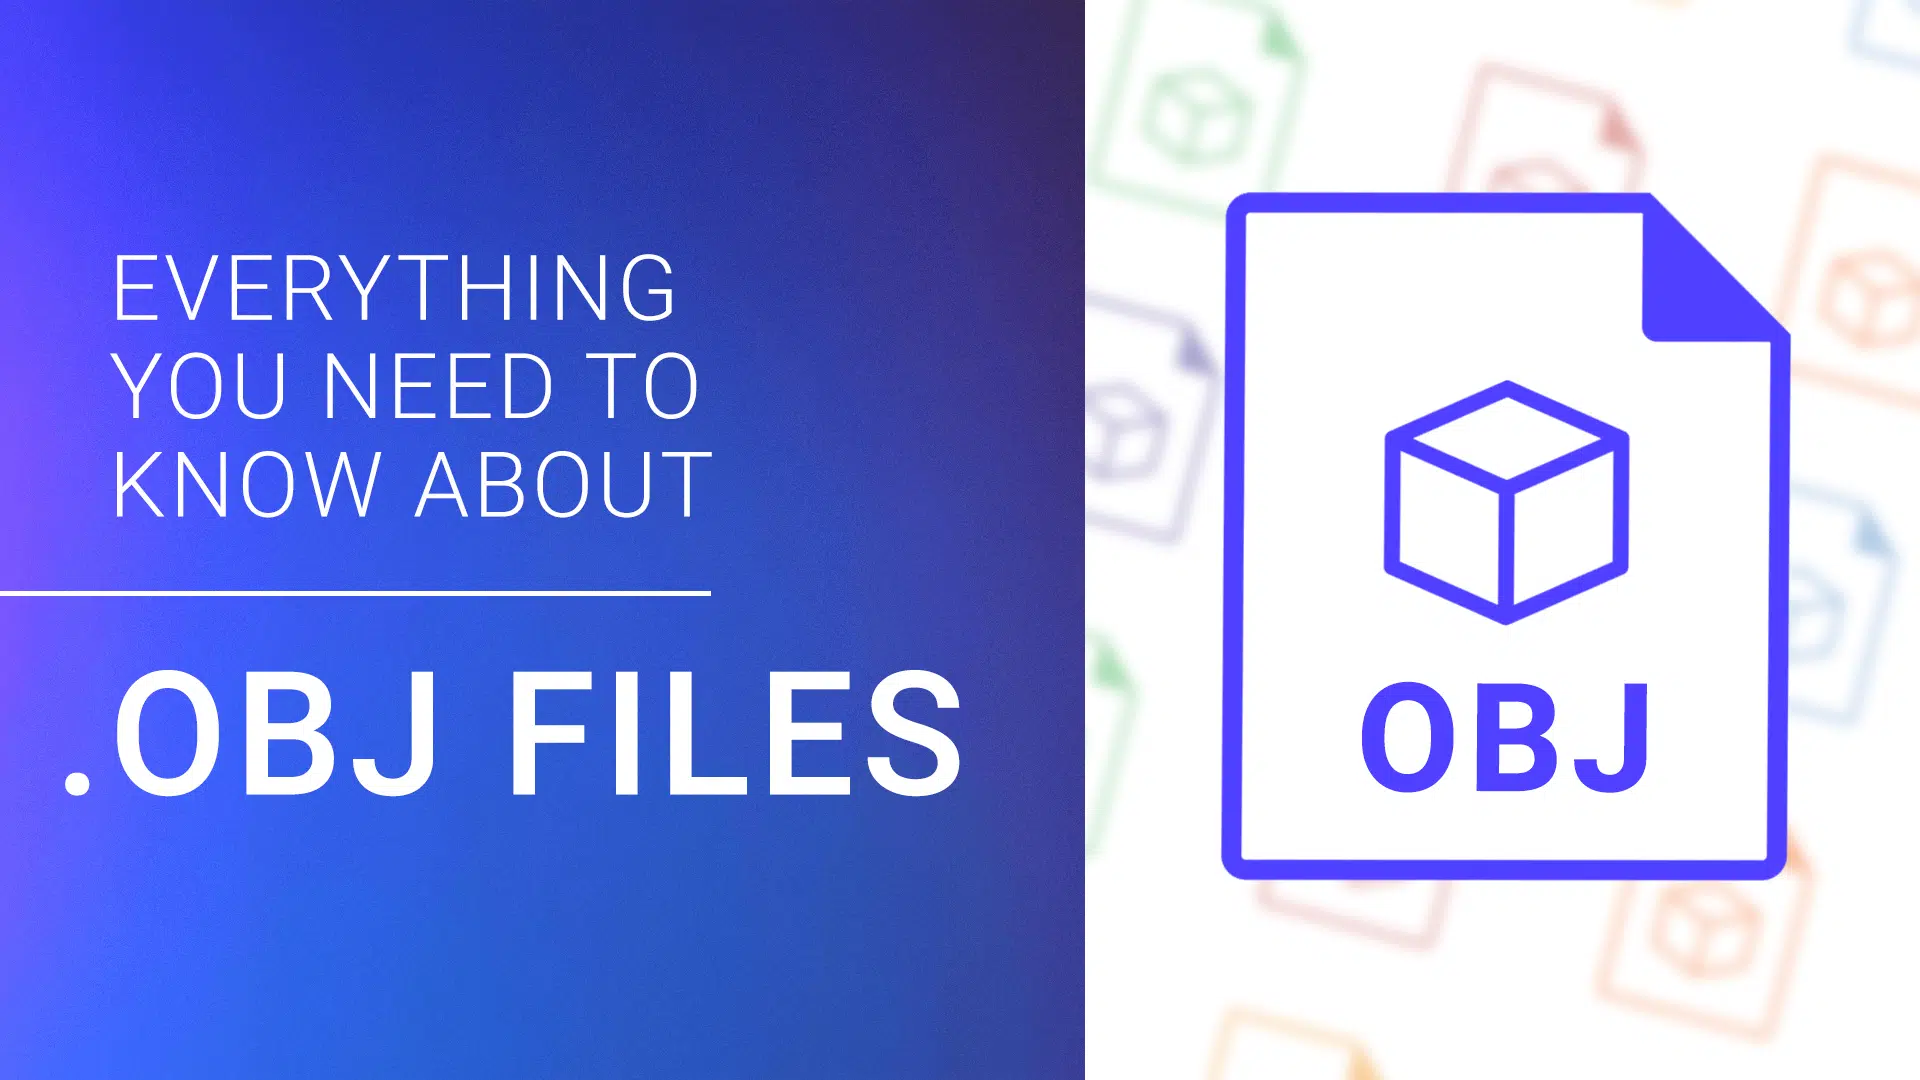 Everything You Need to Know About Using OBJ Files